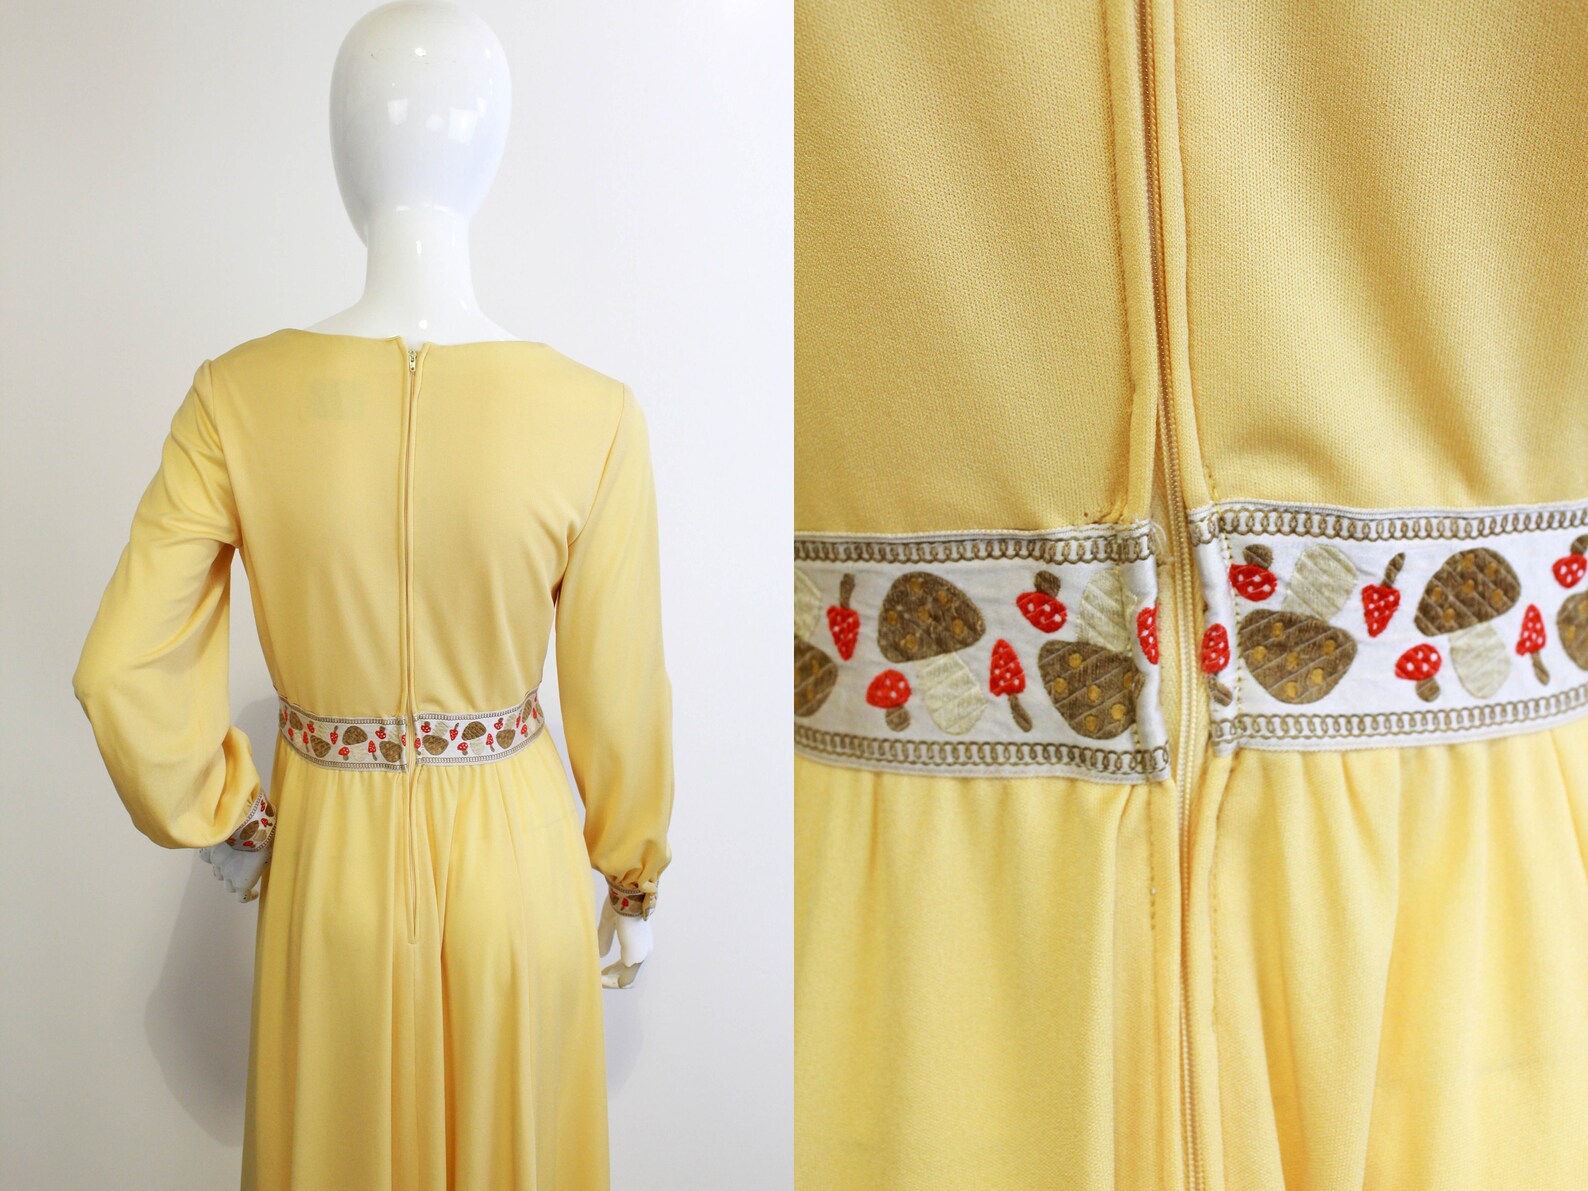 1970s Julie MIller of California Yellow Maxi Dress with Long Puffed Sleeves, Mushroom Embroidered Waist and Cuffs1970s Julie MIller of California Yellow Maxi Dress with Long Puffed Sleeves, Mushroom Embroidered Waist and Cuffs